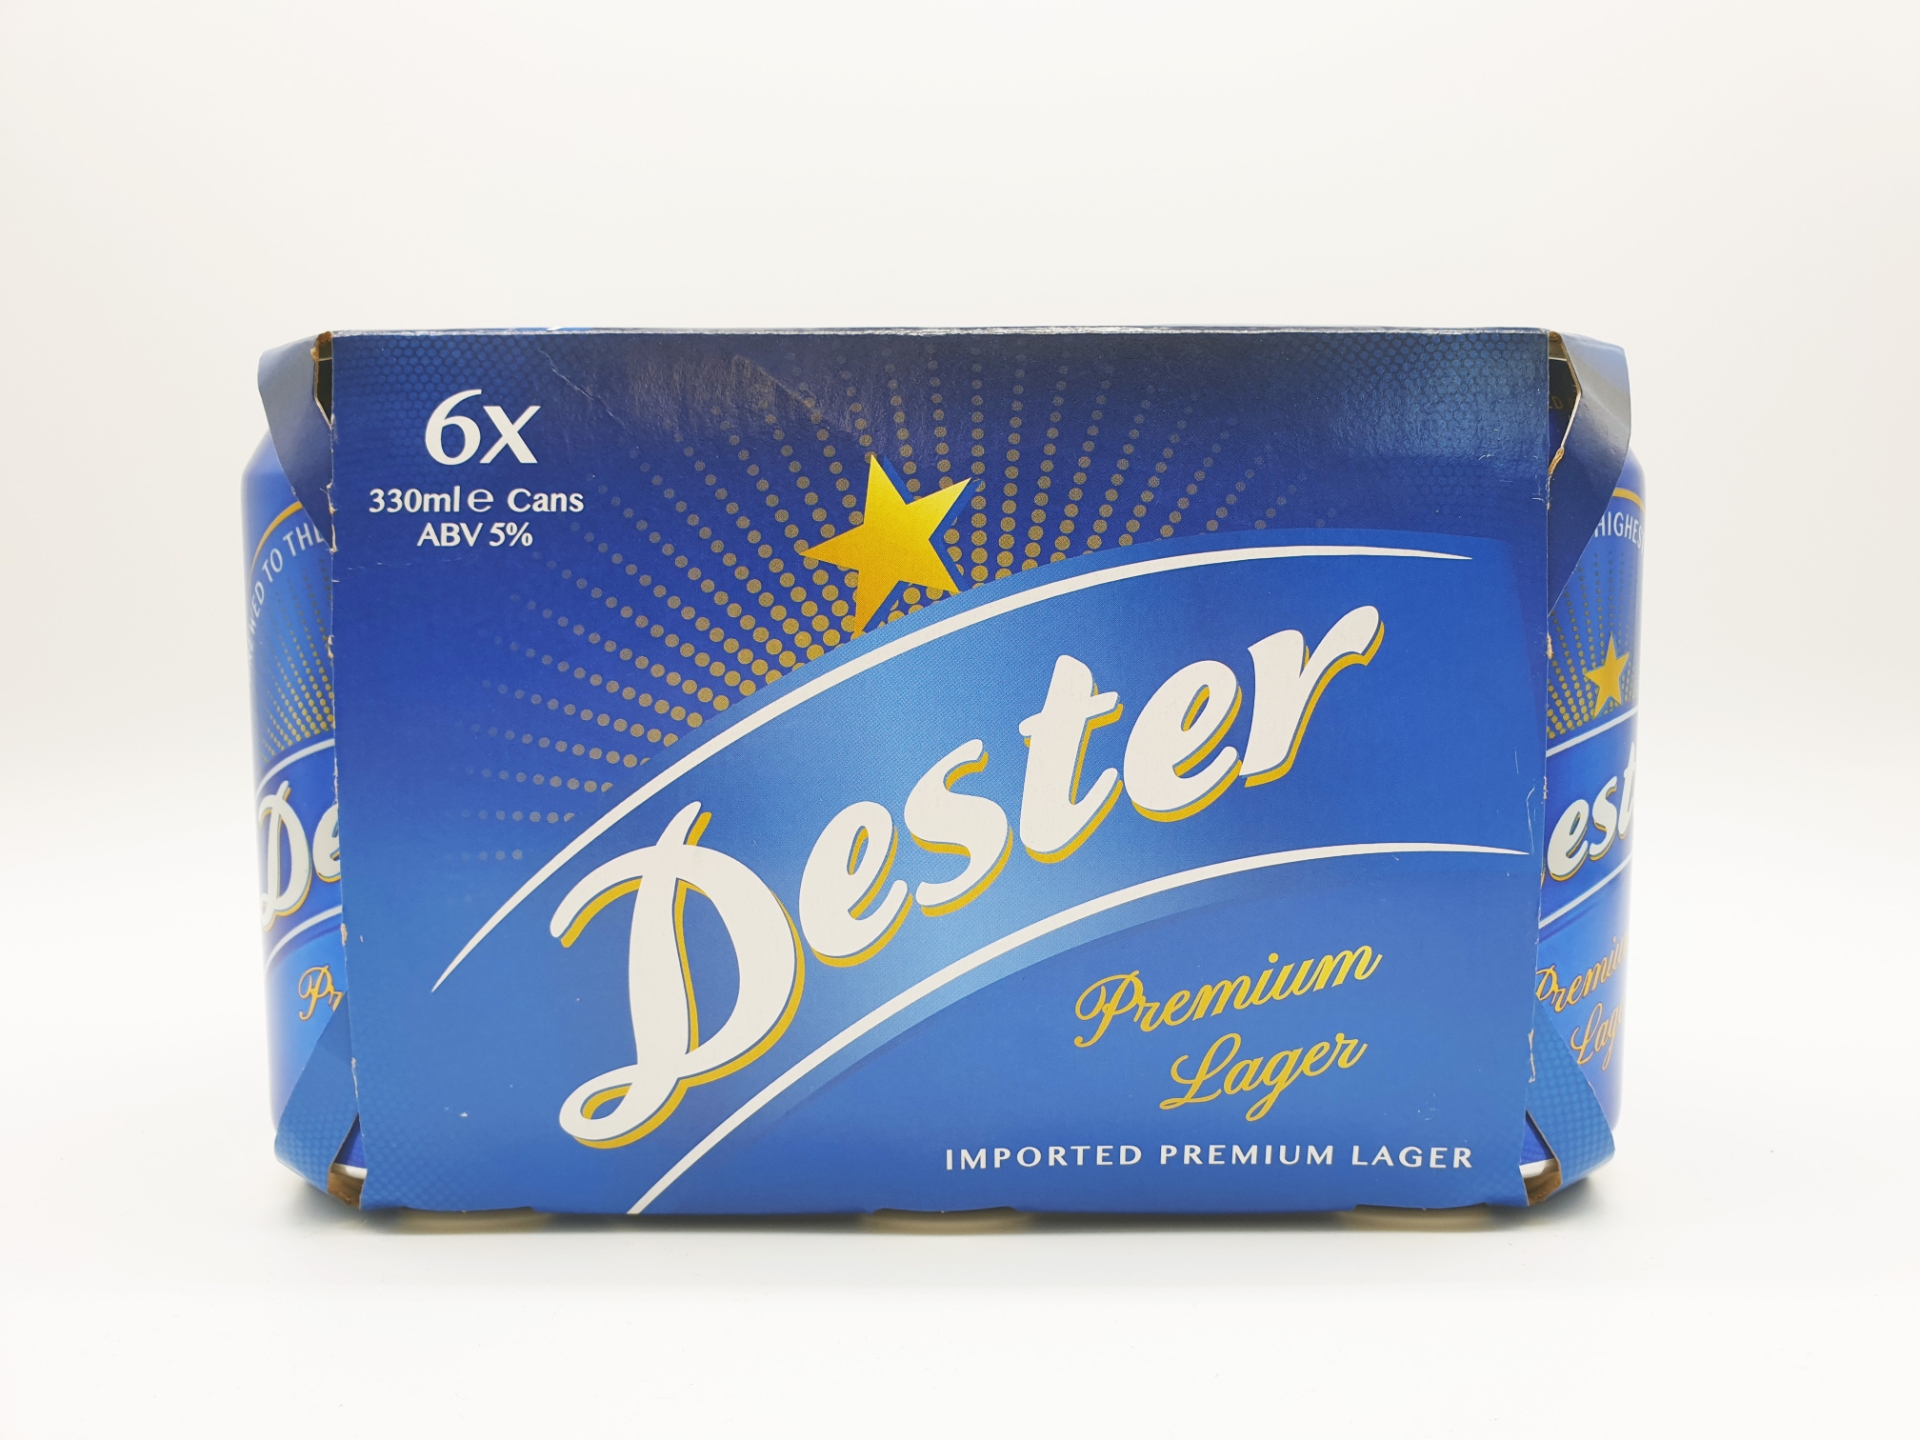 Dester Premium Lager Can Beer (6 cans x 330ml)